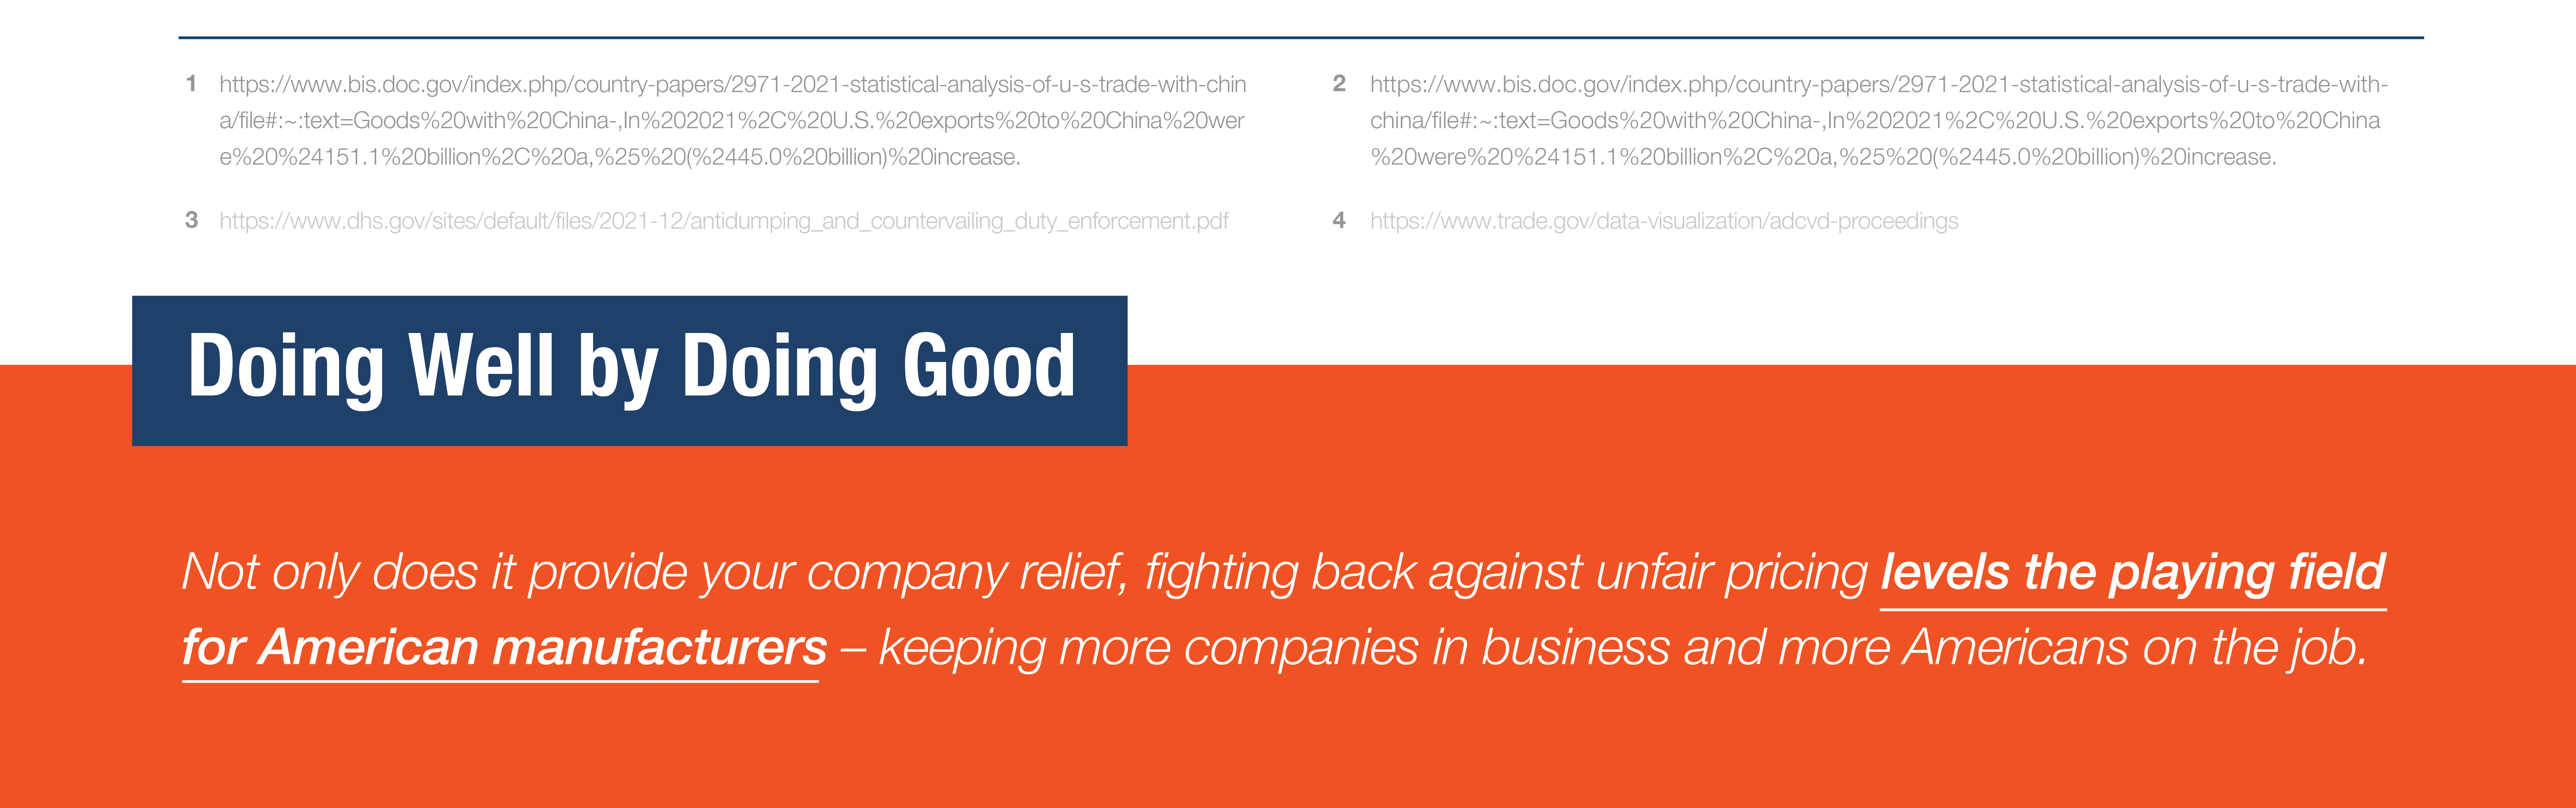 Doing Well by Doing Good

Not only does it provide your company relief, fighting back against unfair pricing levels the playing field for American manufacturers – keeping more companies in business and more Americans on the job.